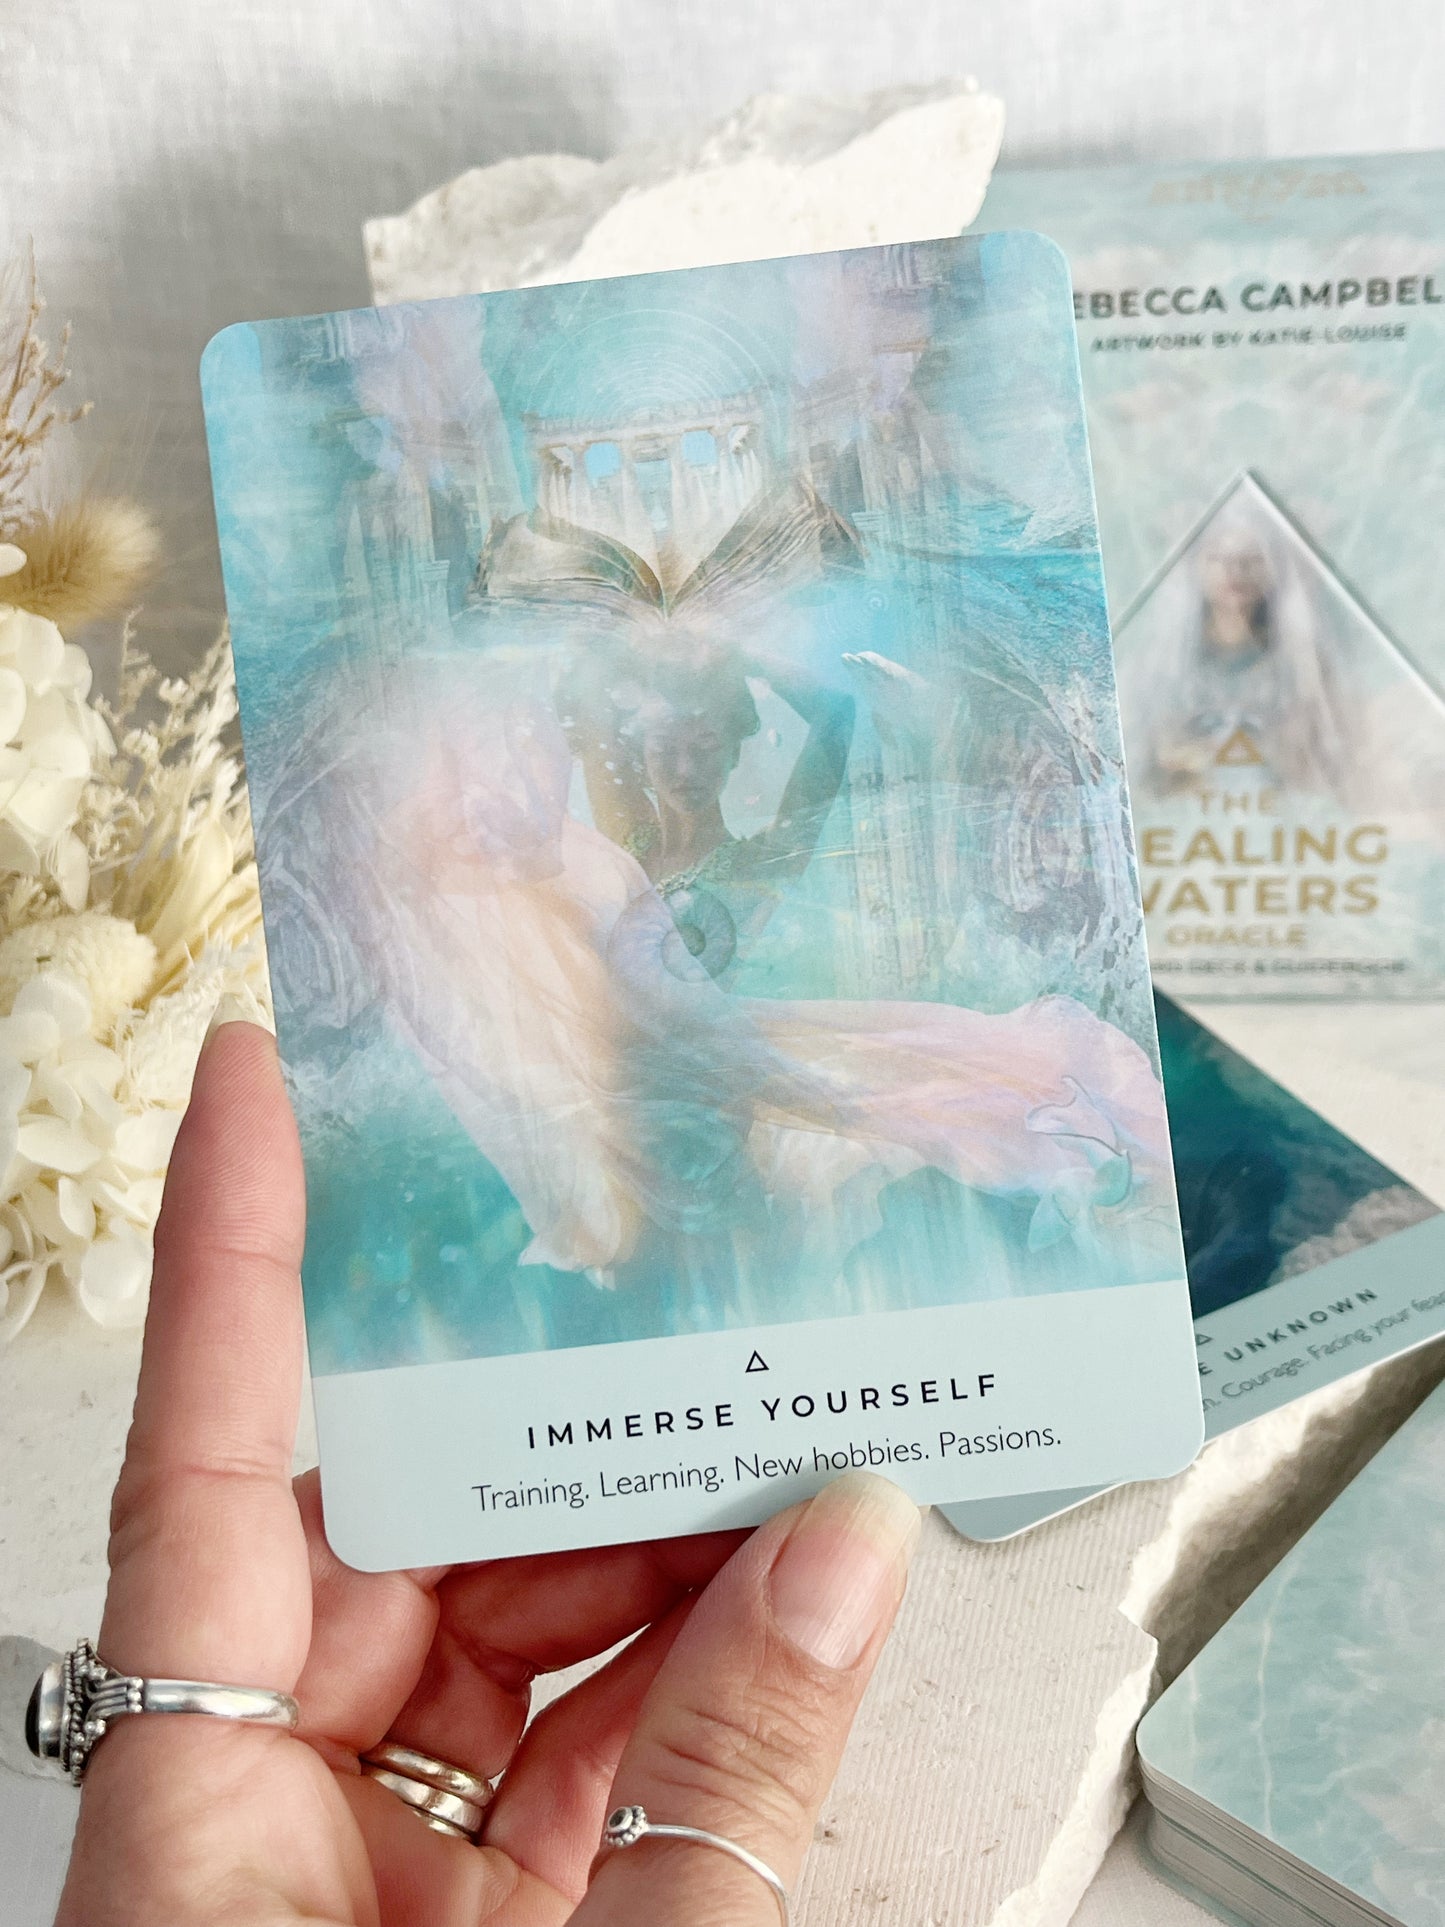 THE HEALING WATERS ORACLE | REBECCA CAMPBELL